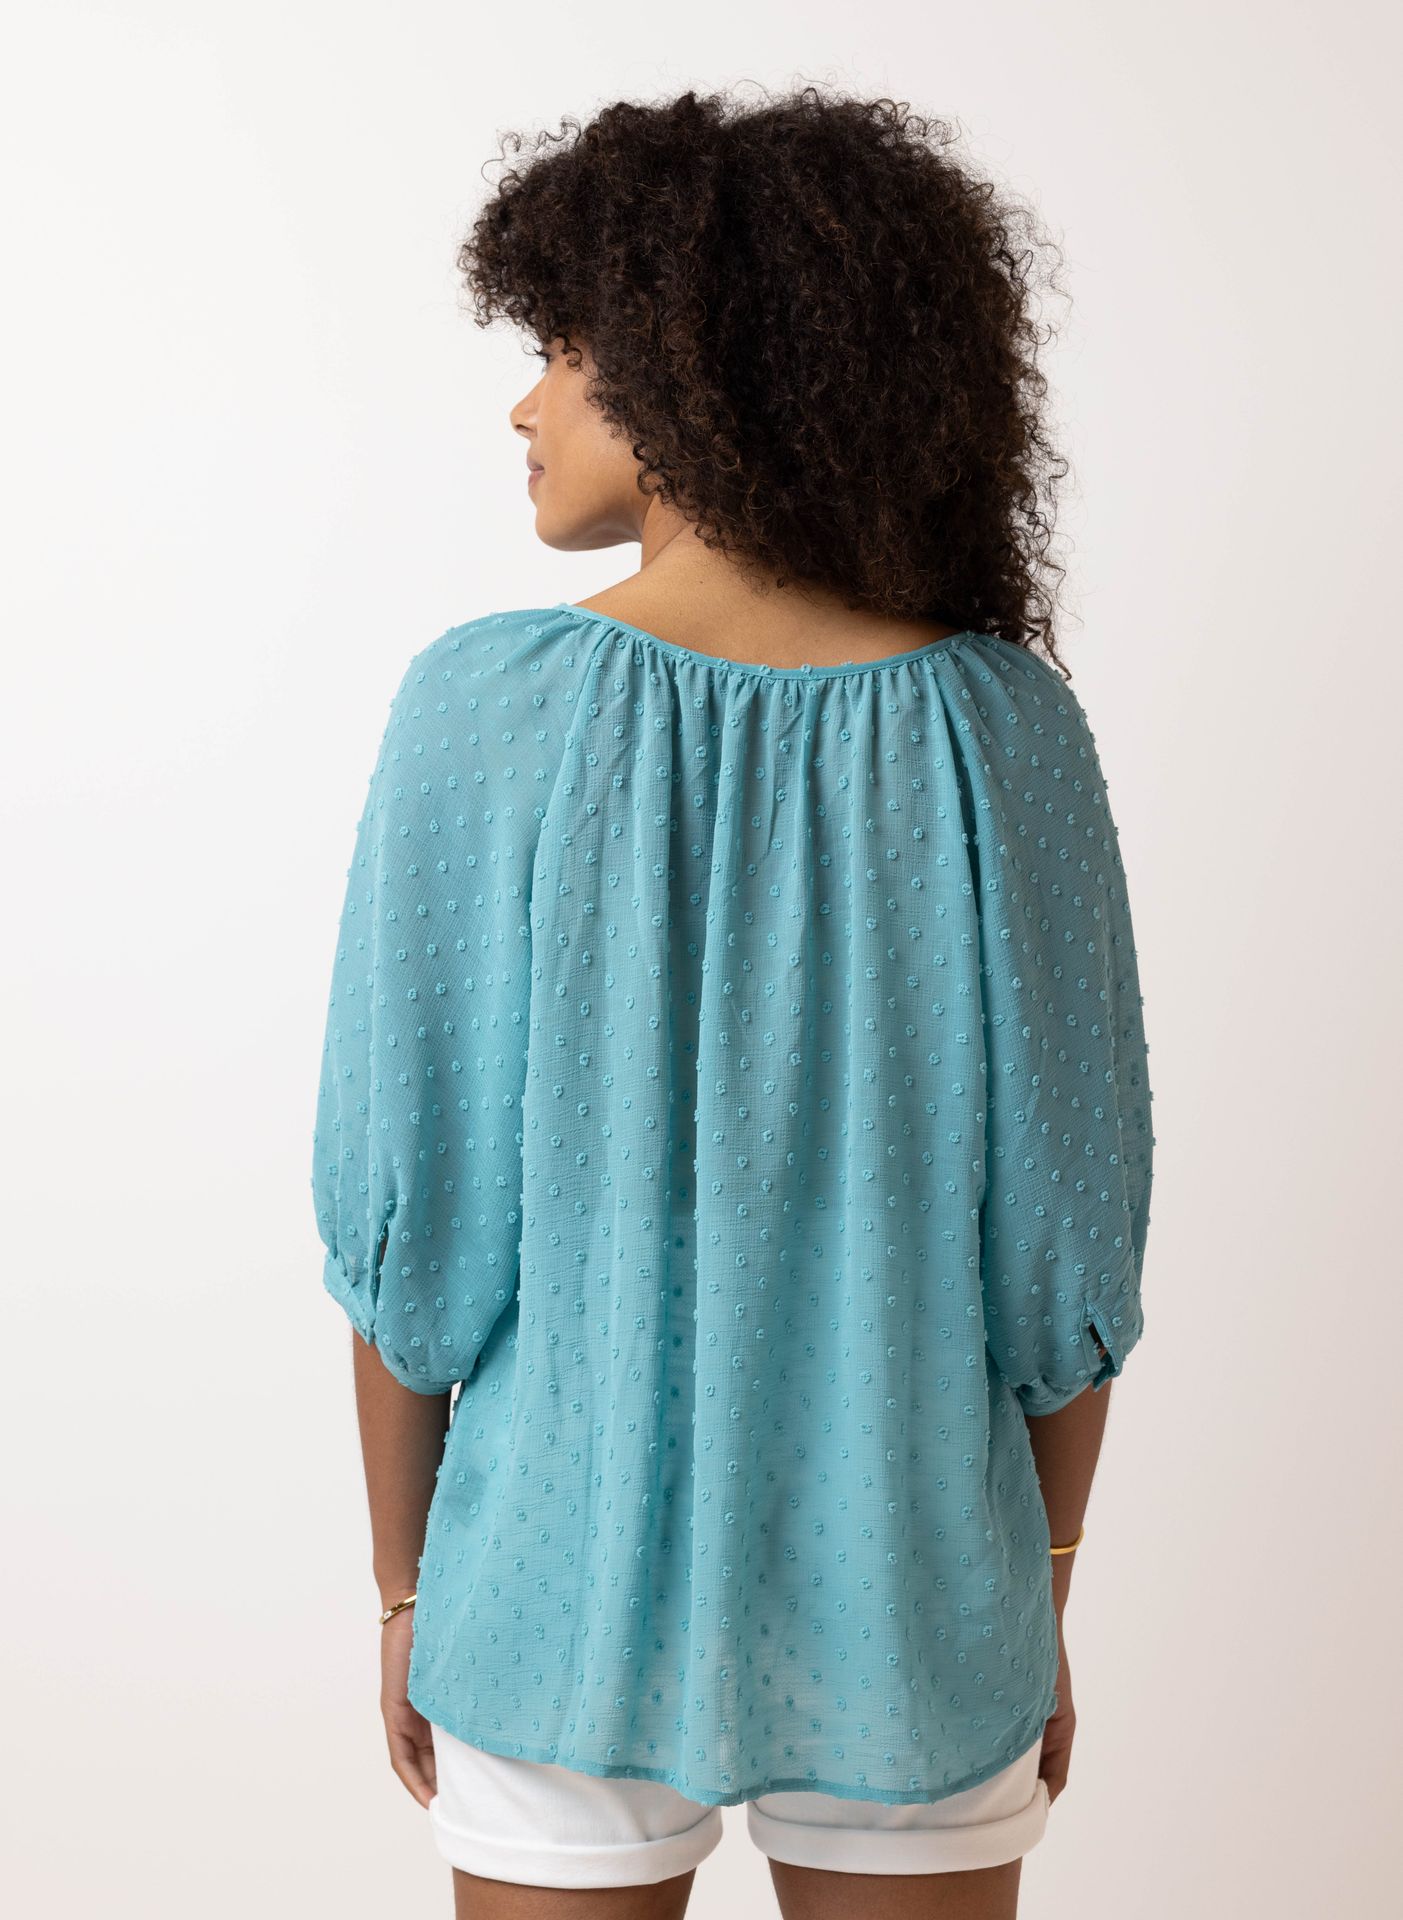 Norah Blouse turquoise turquoise 212787-475